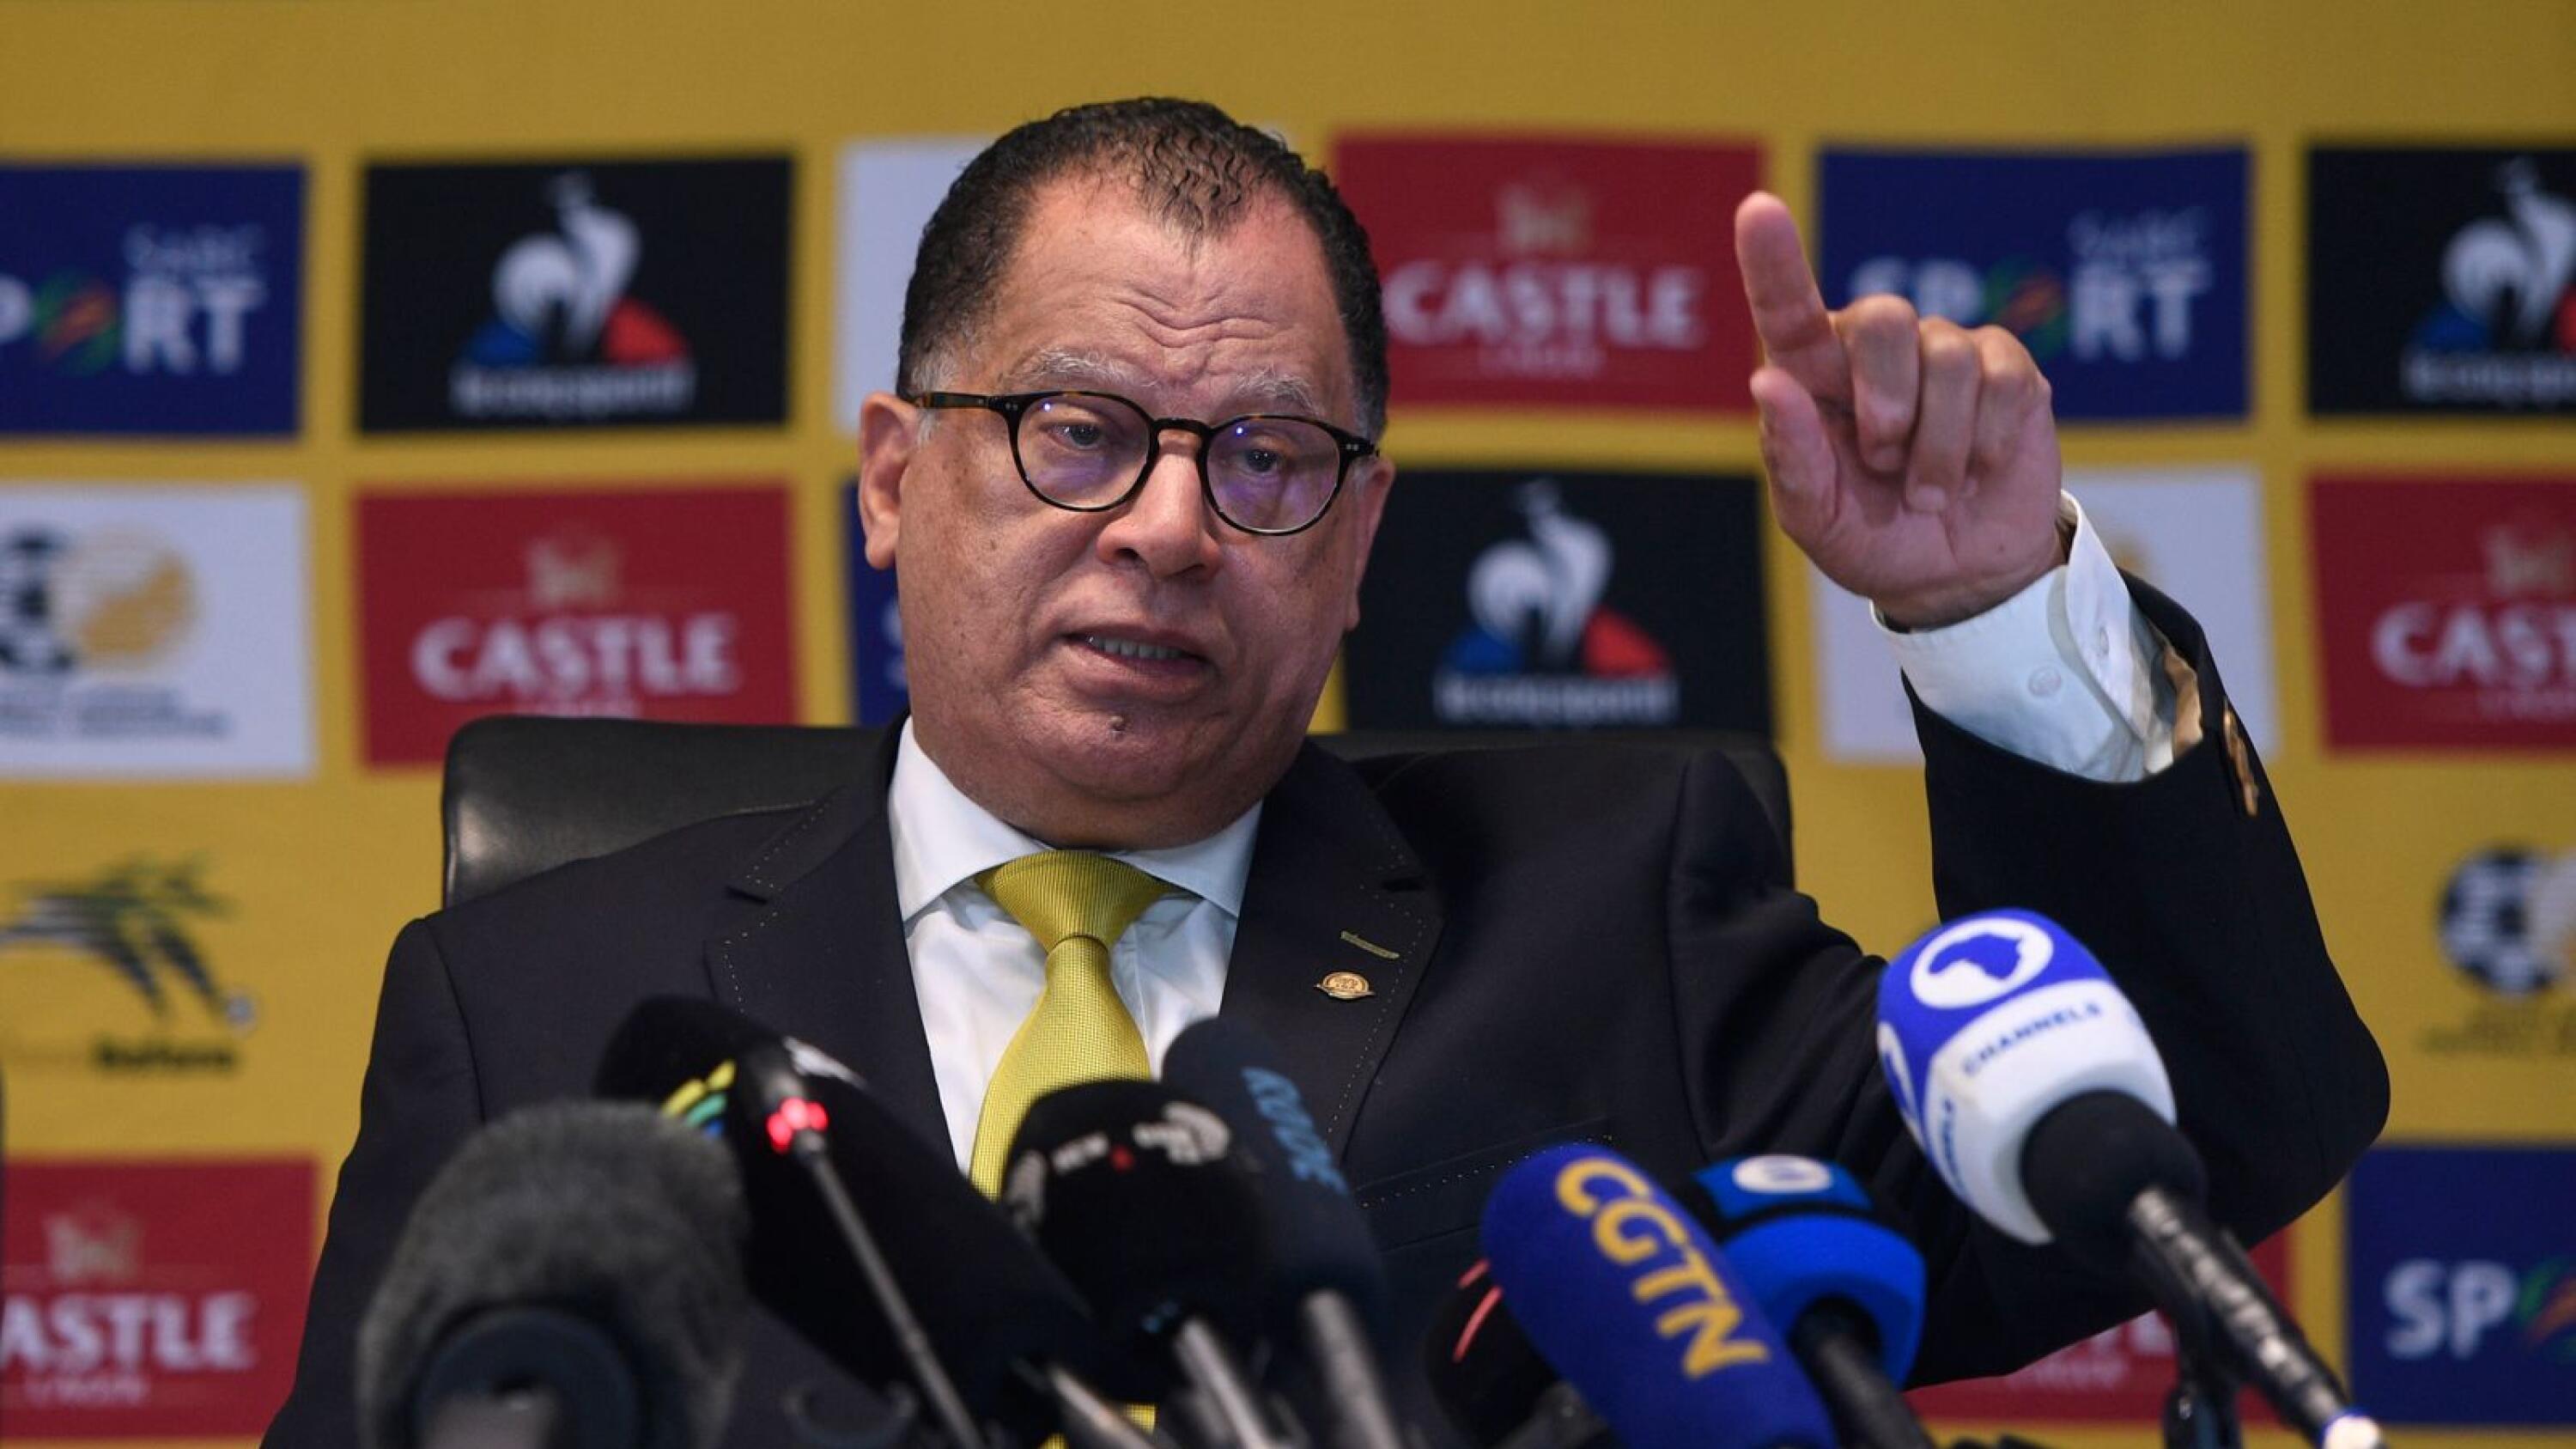 SAFA President Danny Jordaan speaks to the media during a press conference at SAFA House in Nasrec on Wednesday